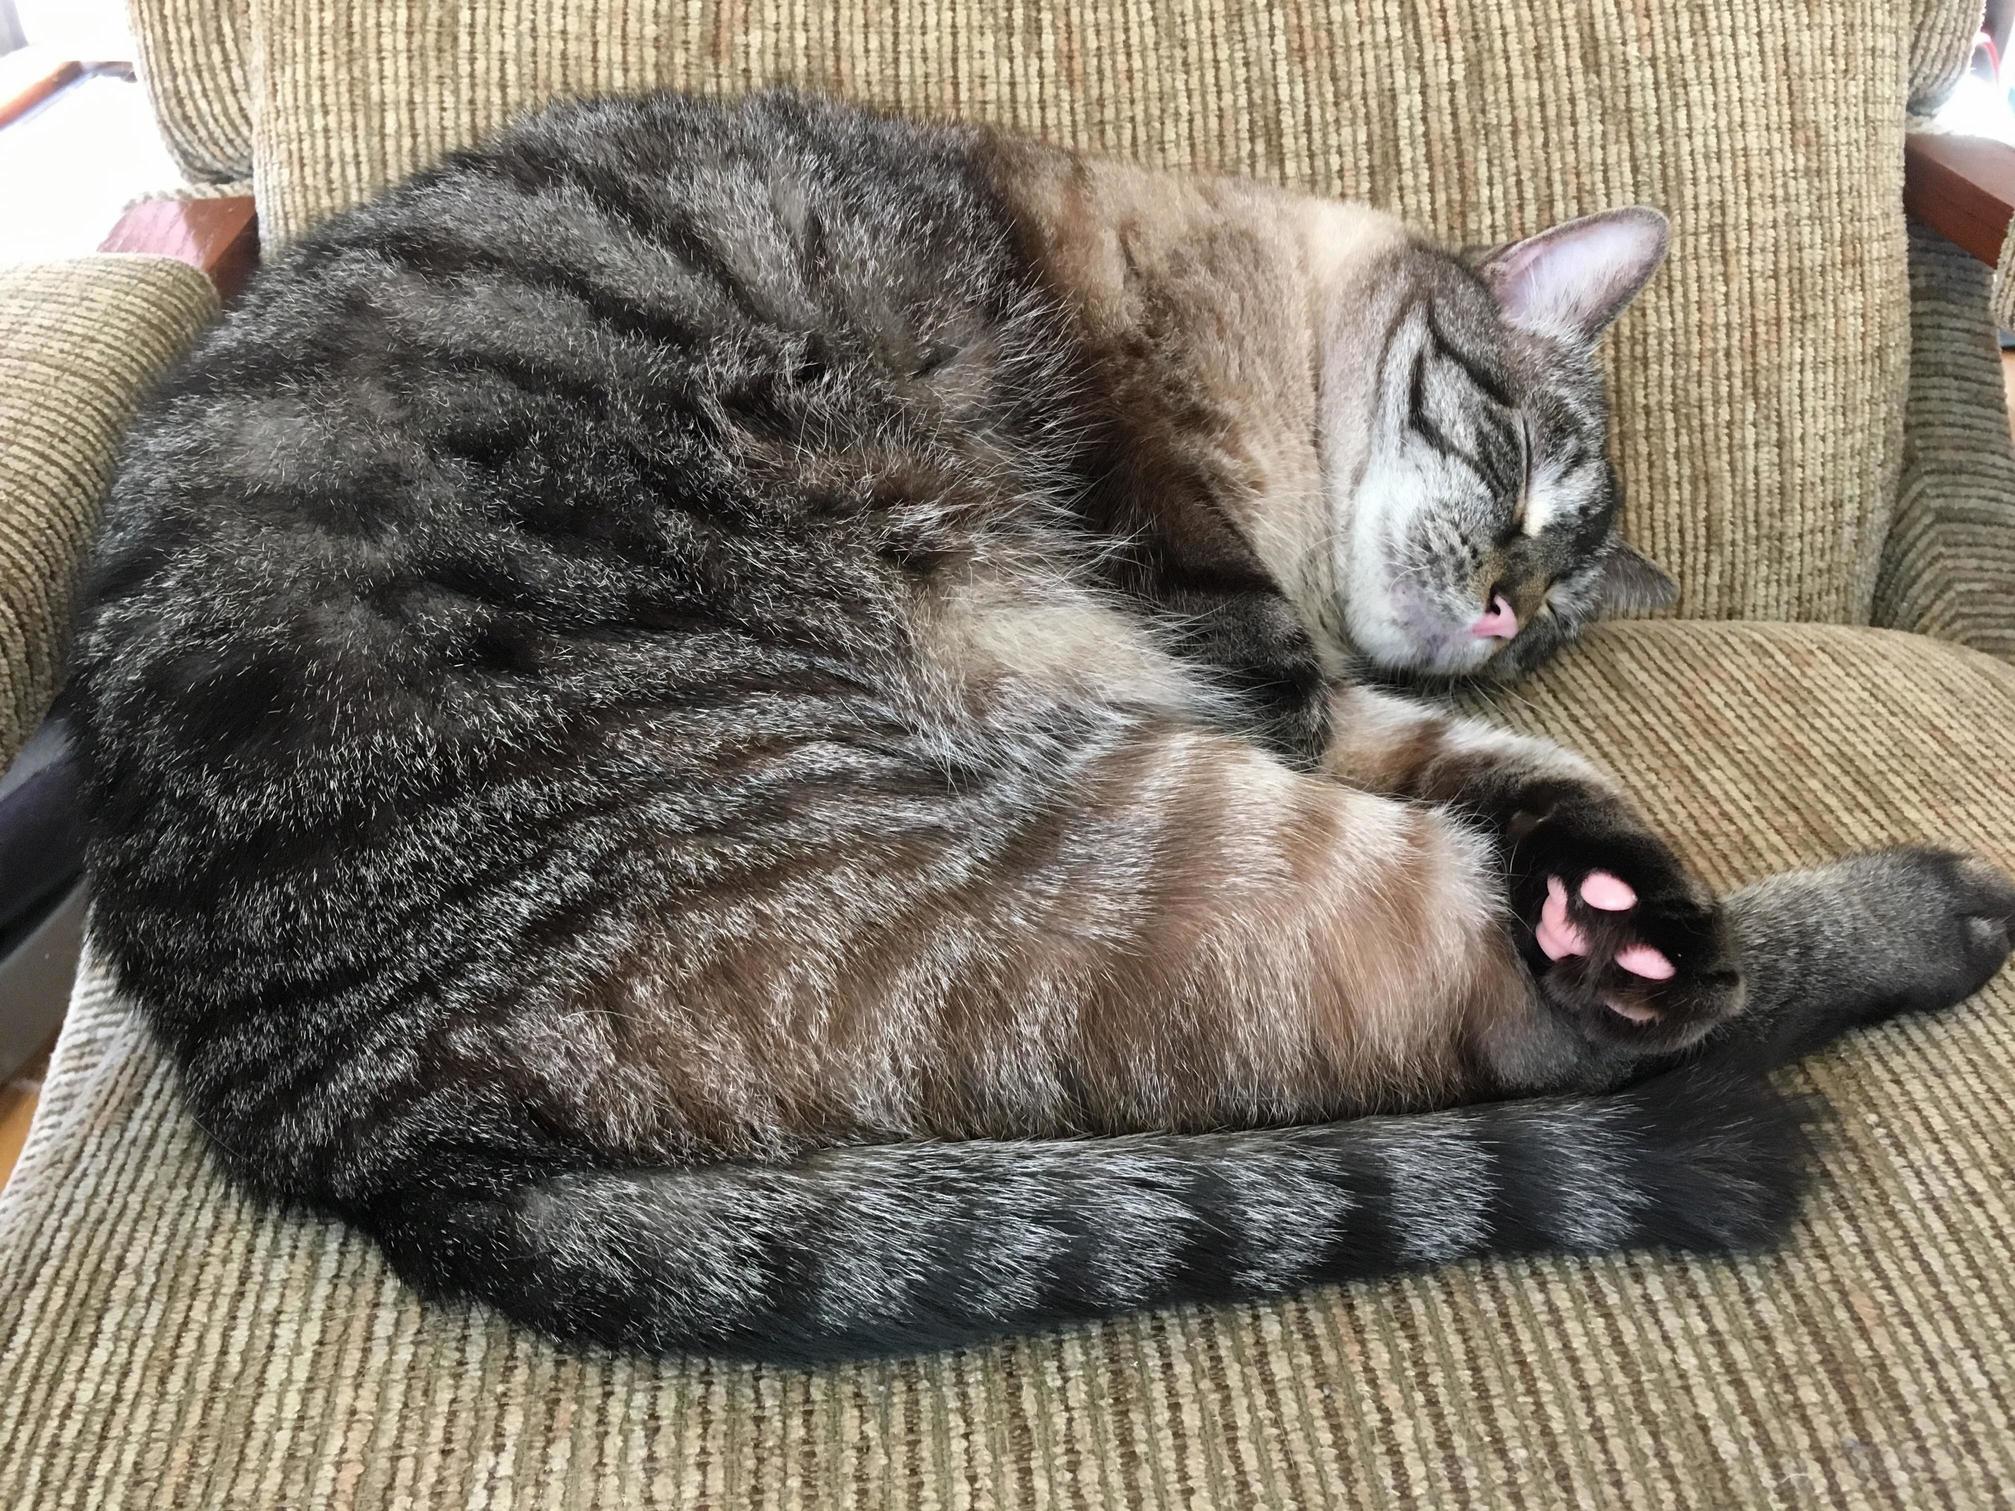 Mr pink beans taking a summer afternoon nap.